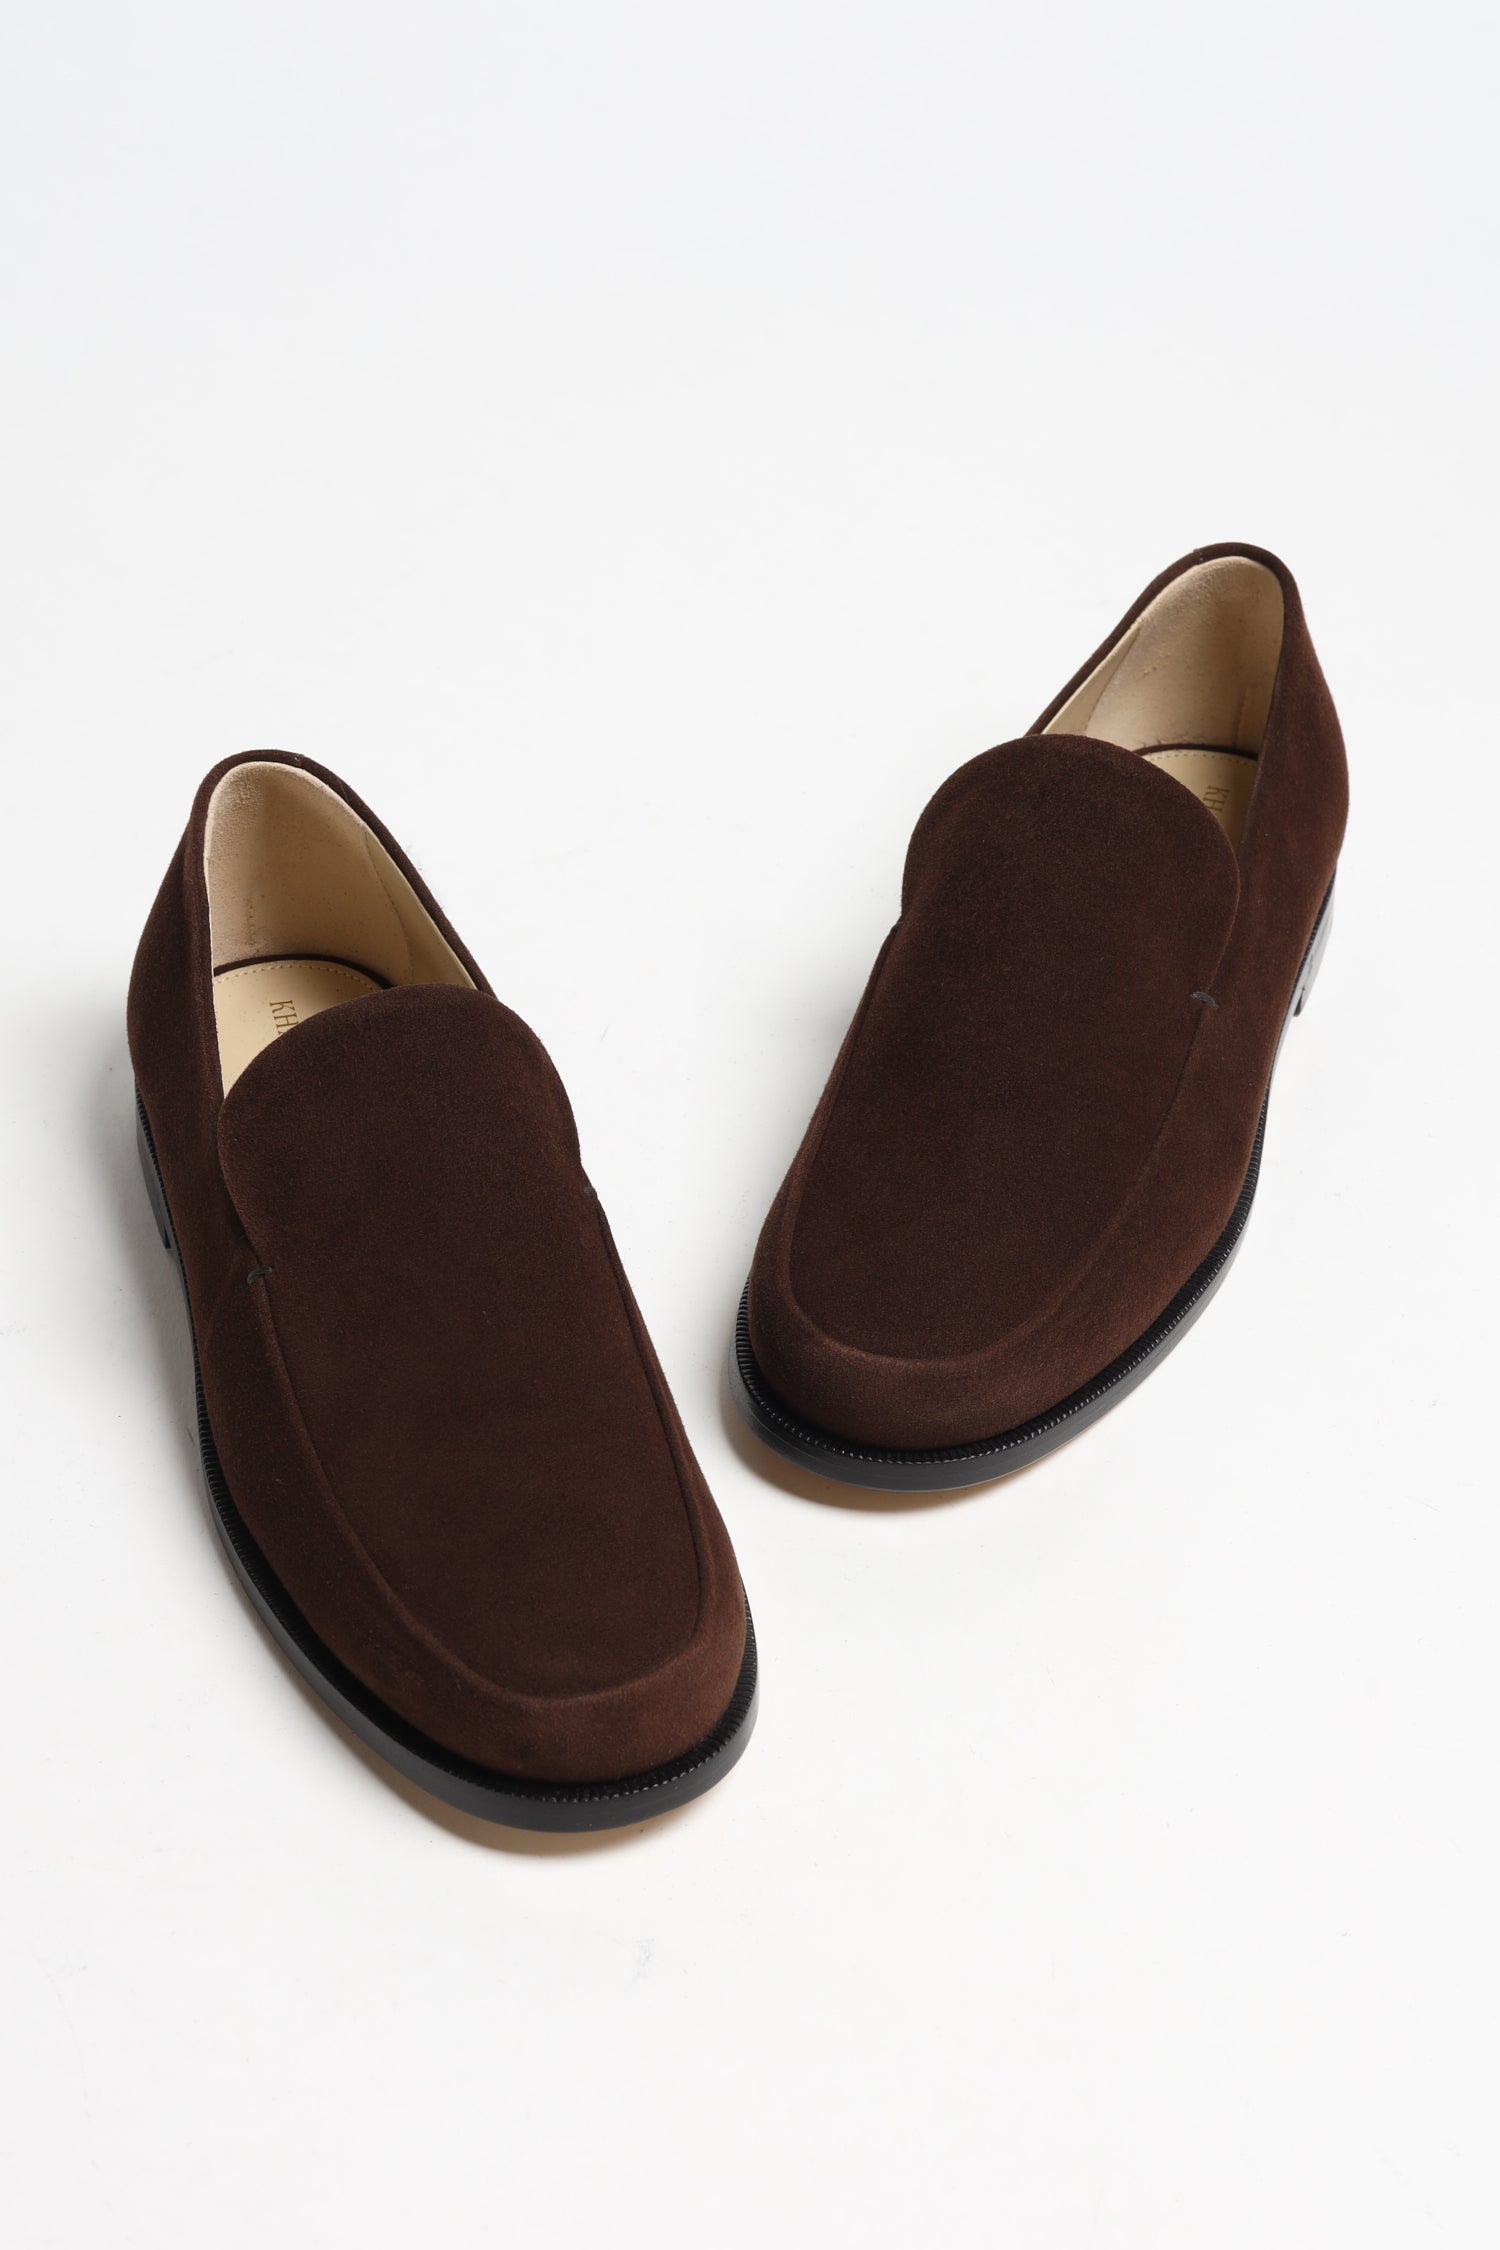 Loafer Alessio in Coffee SuedeKhaite - Anita Hass